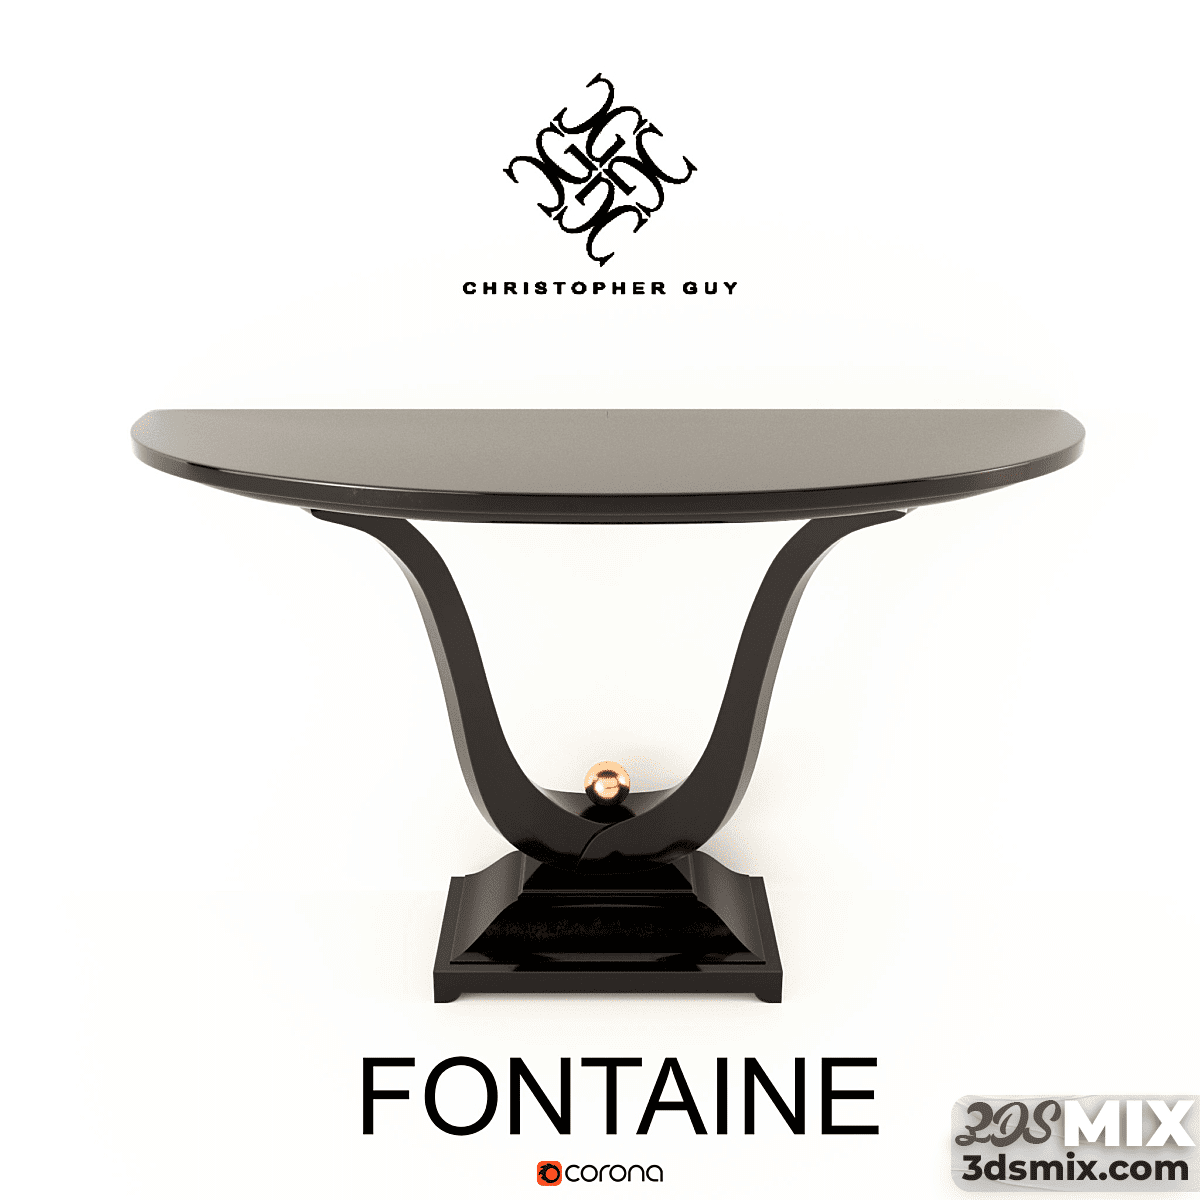 Christopher Guy Fontaine Console Model